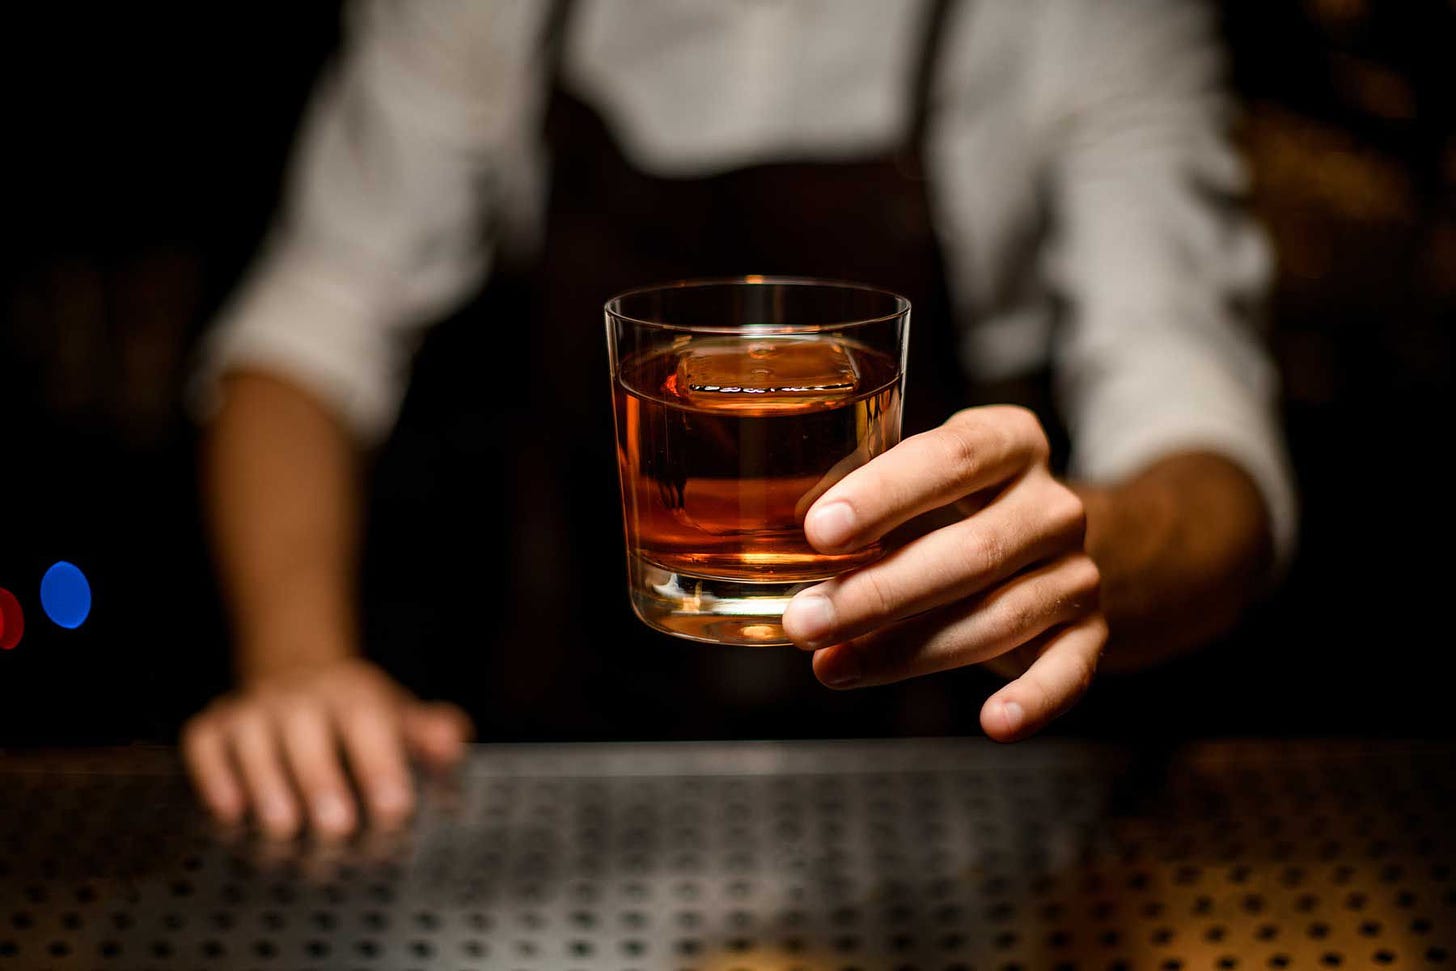 How to Drink Whisky the Right Way, According to an Expert